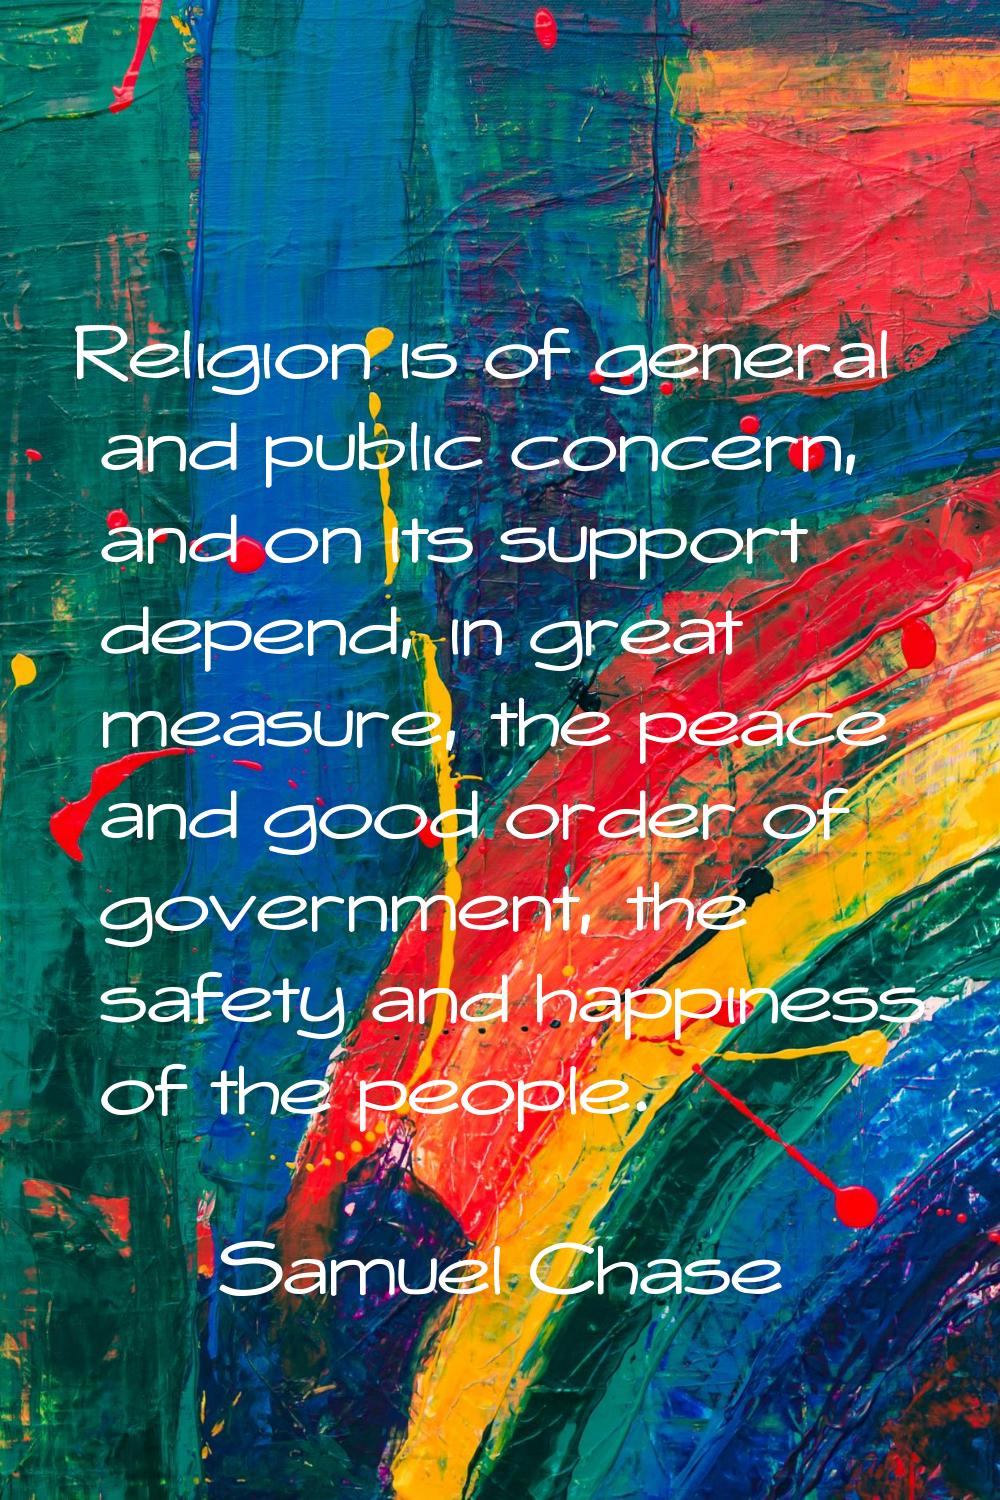 Religion is of general and public concern, and on its support depend, in great measure, the peace a